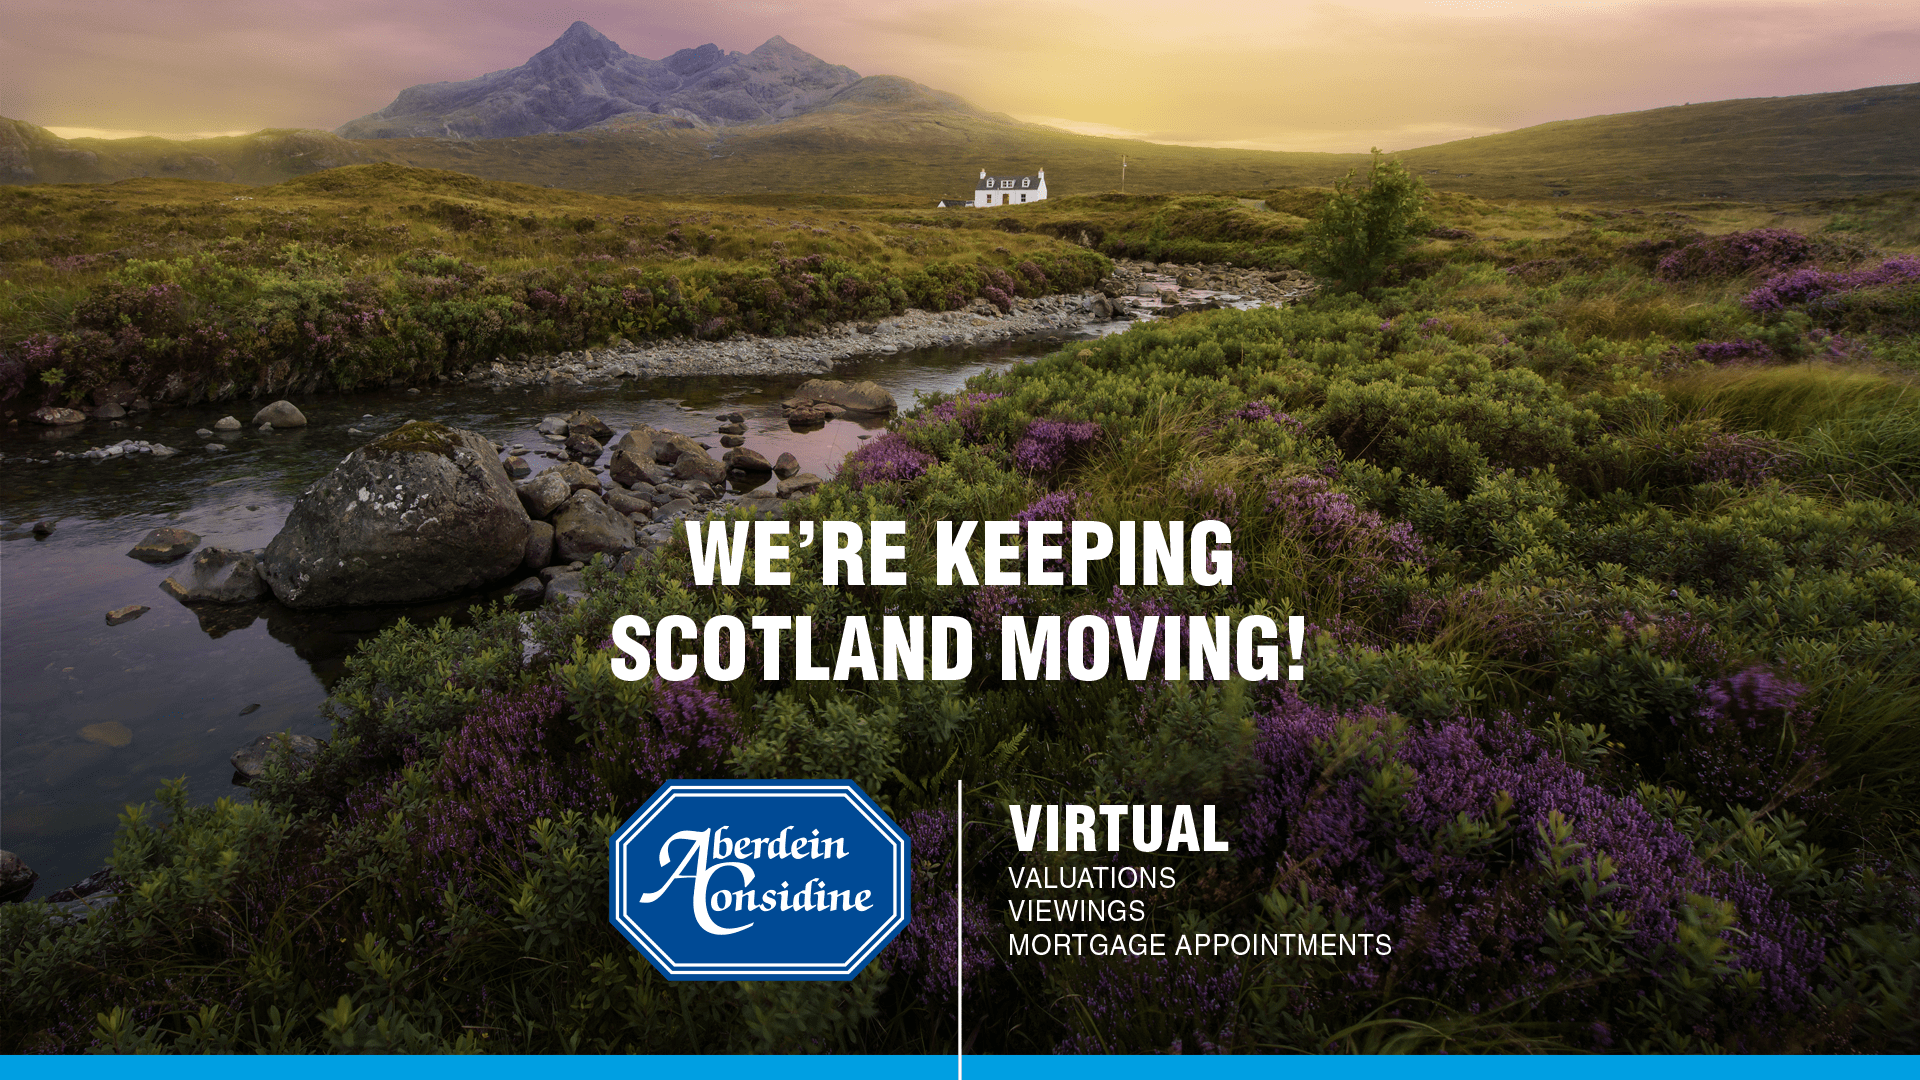 We're online and keeping Scotland moving during Lockdown II